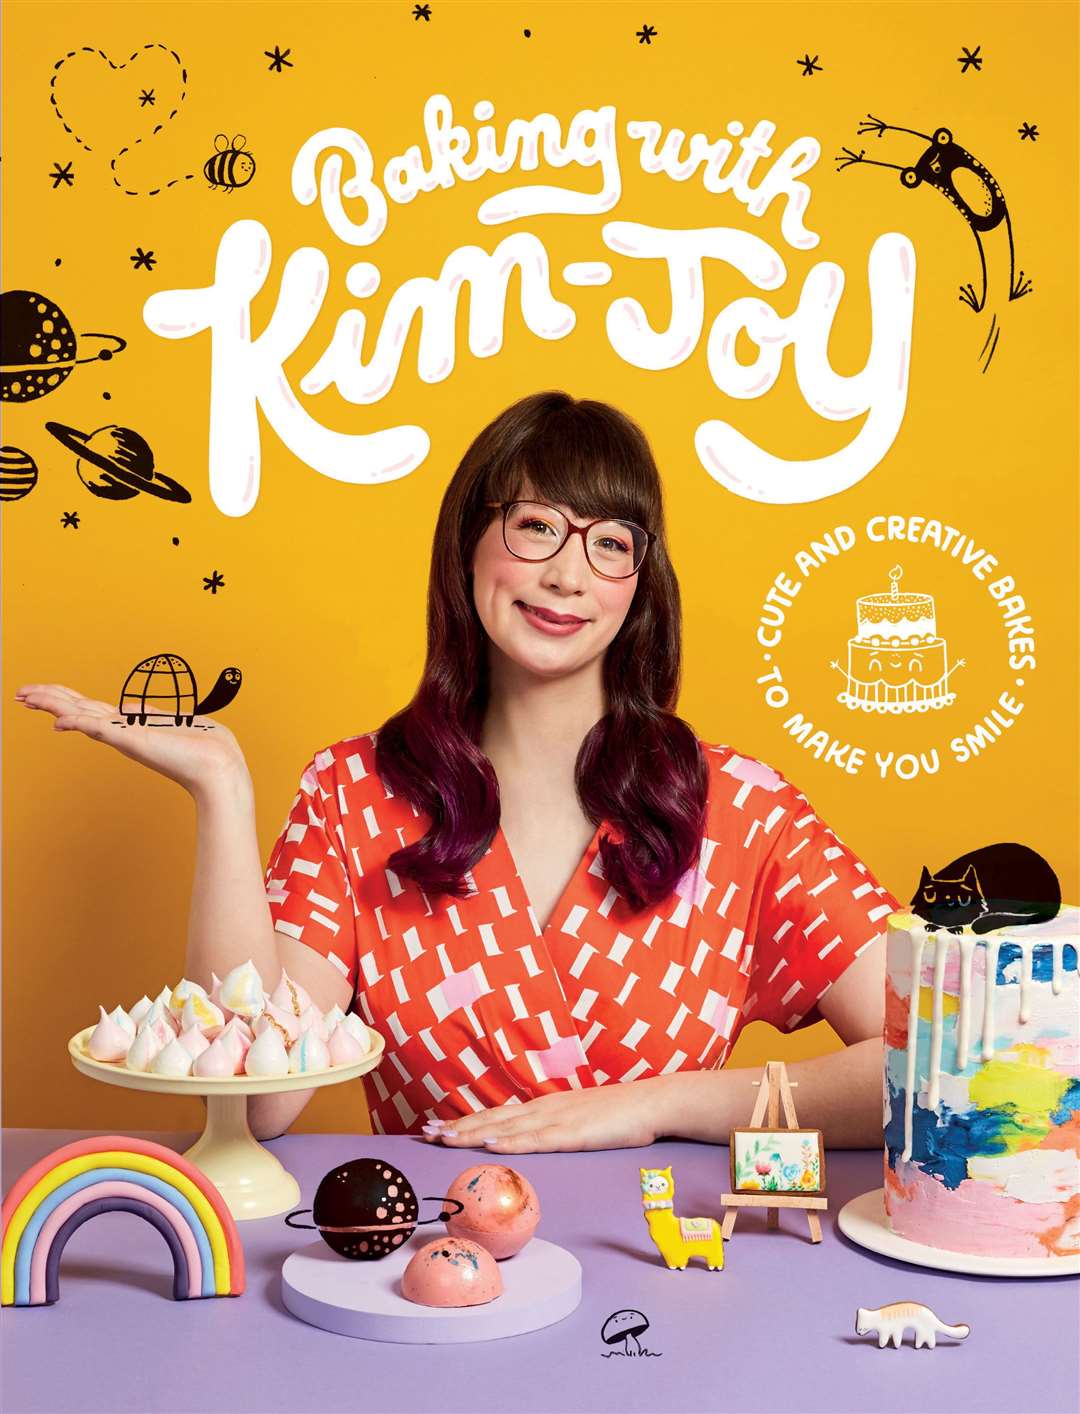 Baking With Kim-Joy: Cute And Creative Bakes To Make You Smile by Kim-Joy, is published by Quadrille, priced £18.99. Available now.